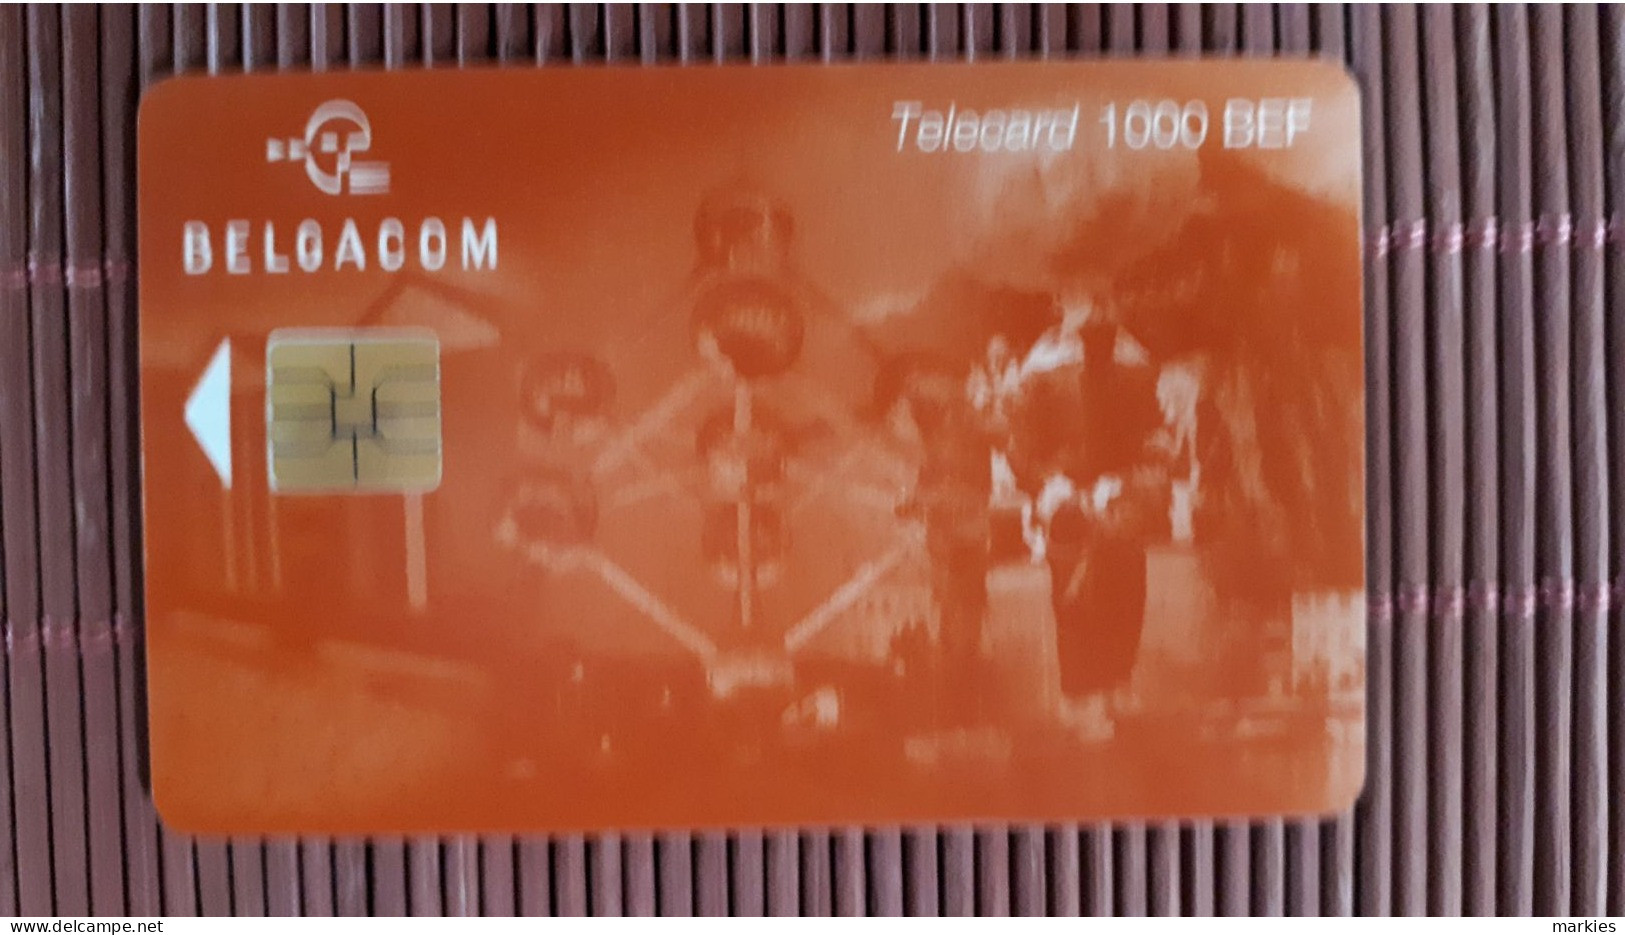 Atomium Phonecard  1000 BEF Used GI  30.08.2001 Low Issue Rare - Mit Chip